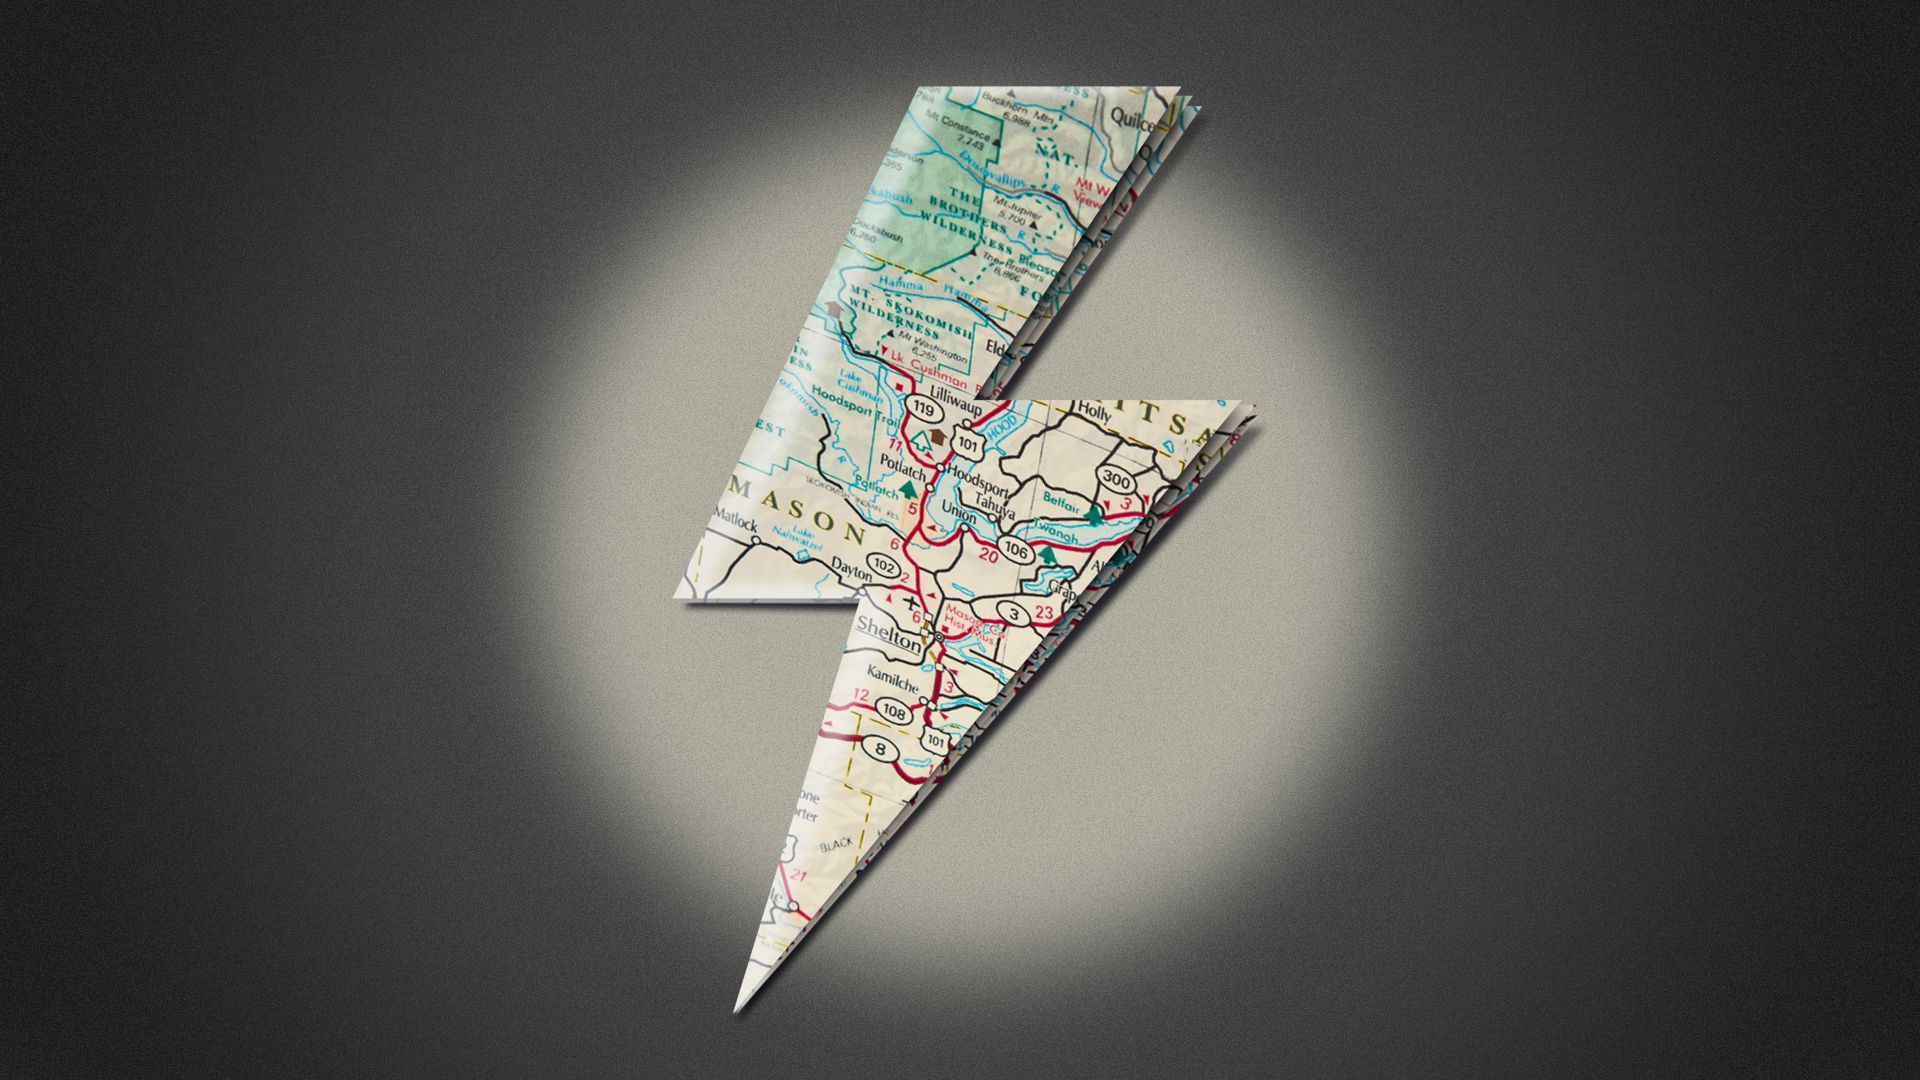 Illustration of a map in the shape of a lightning bolt